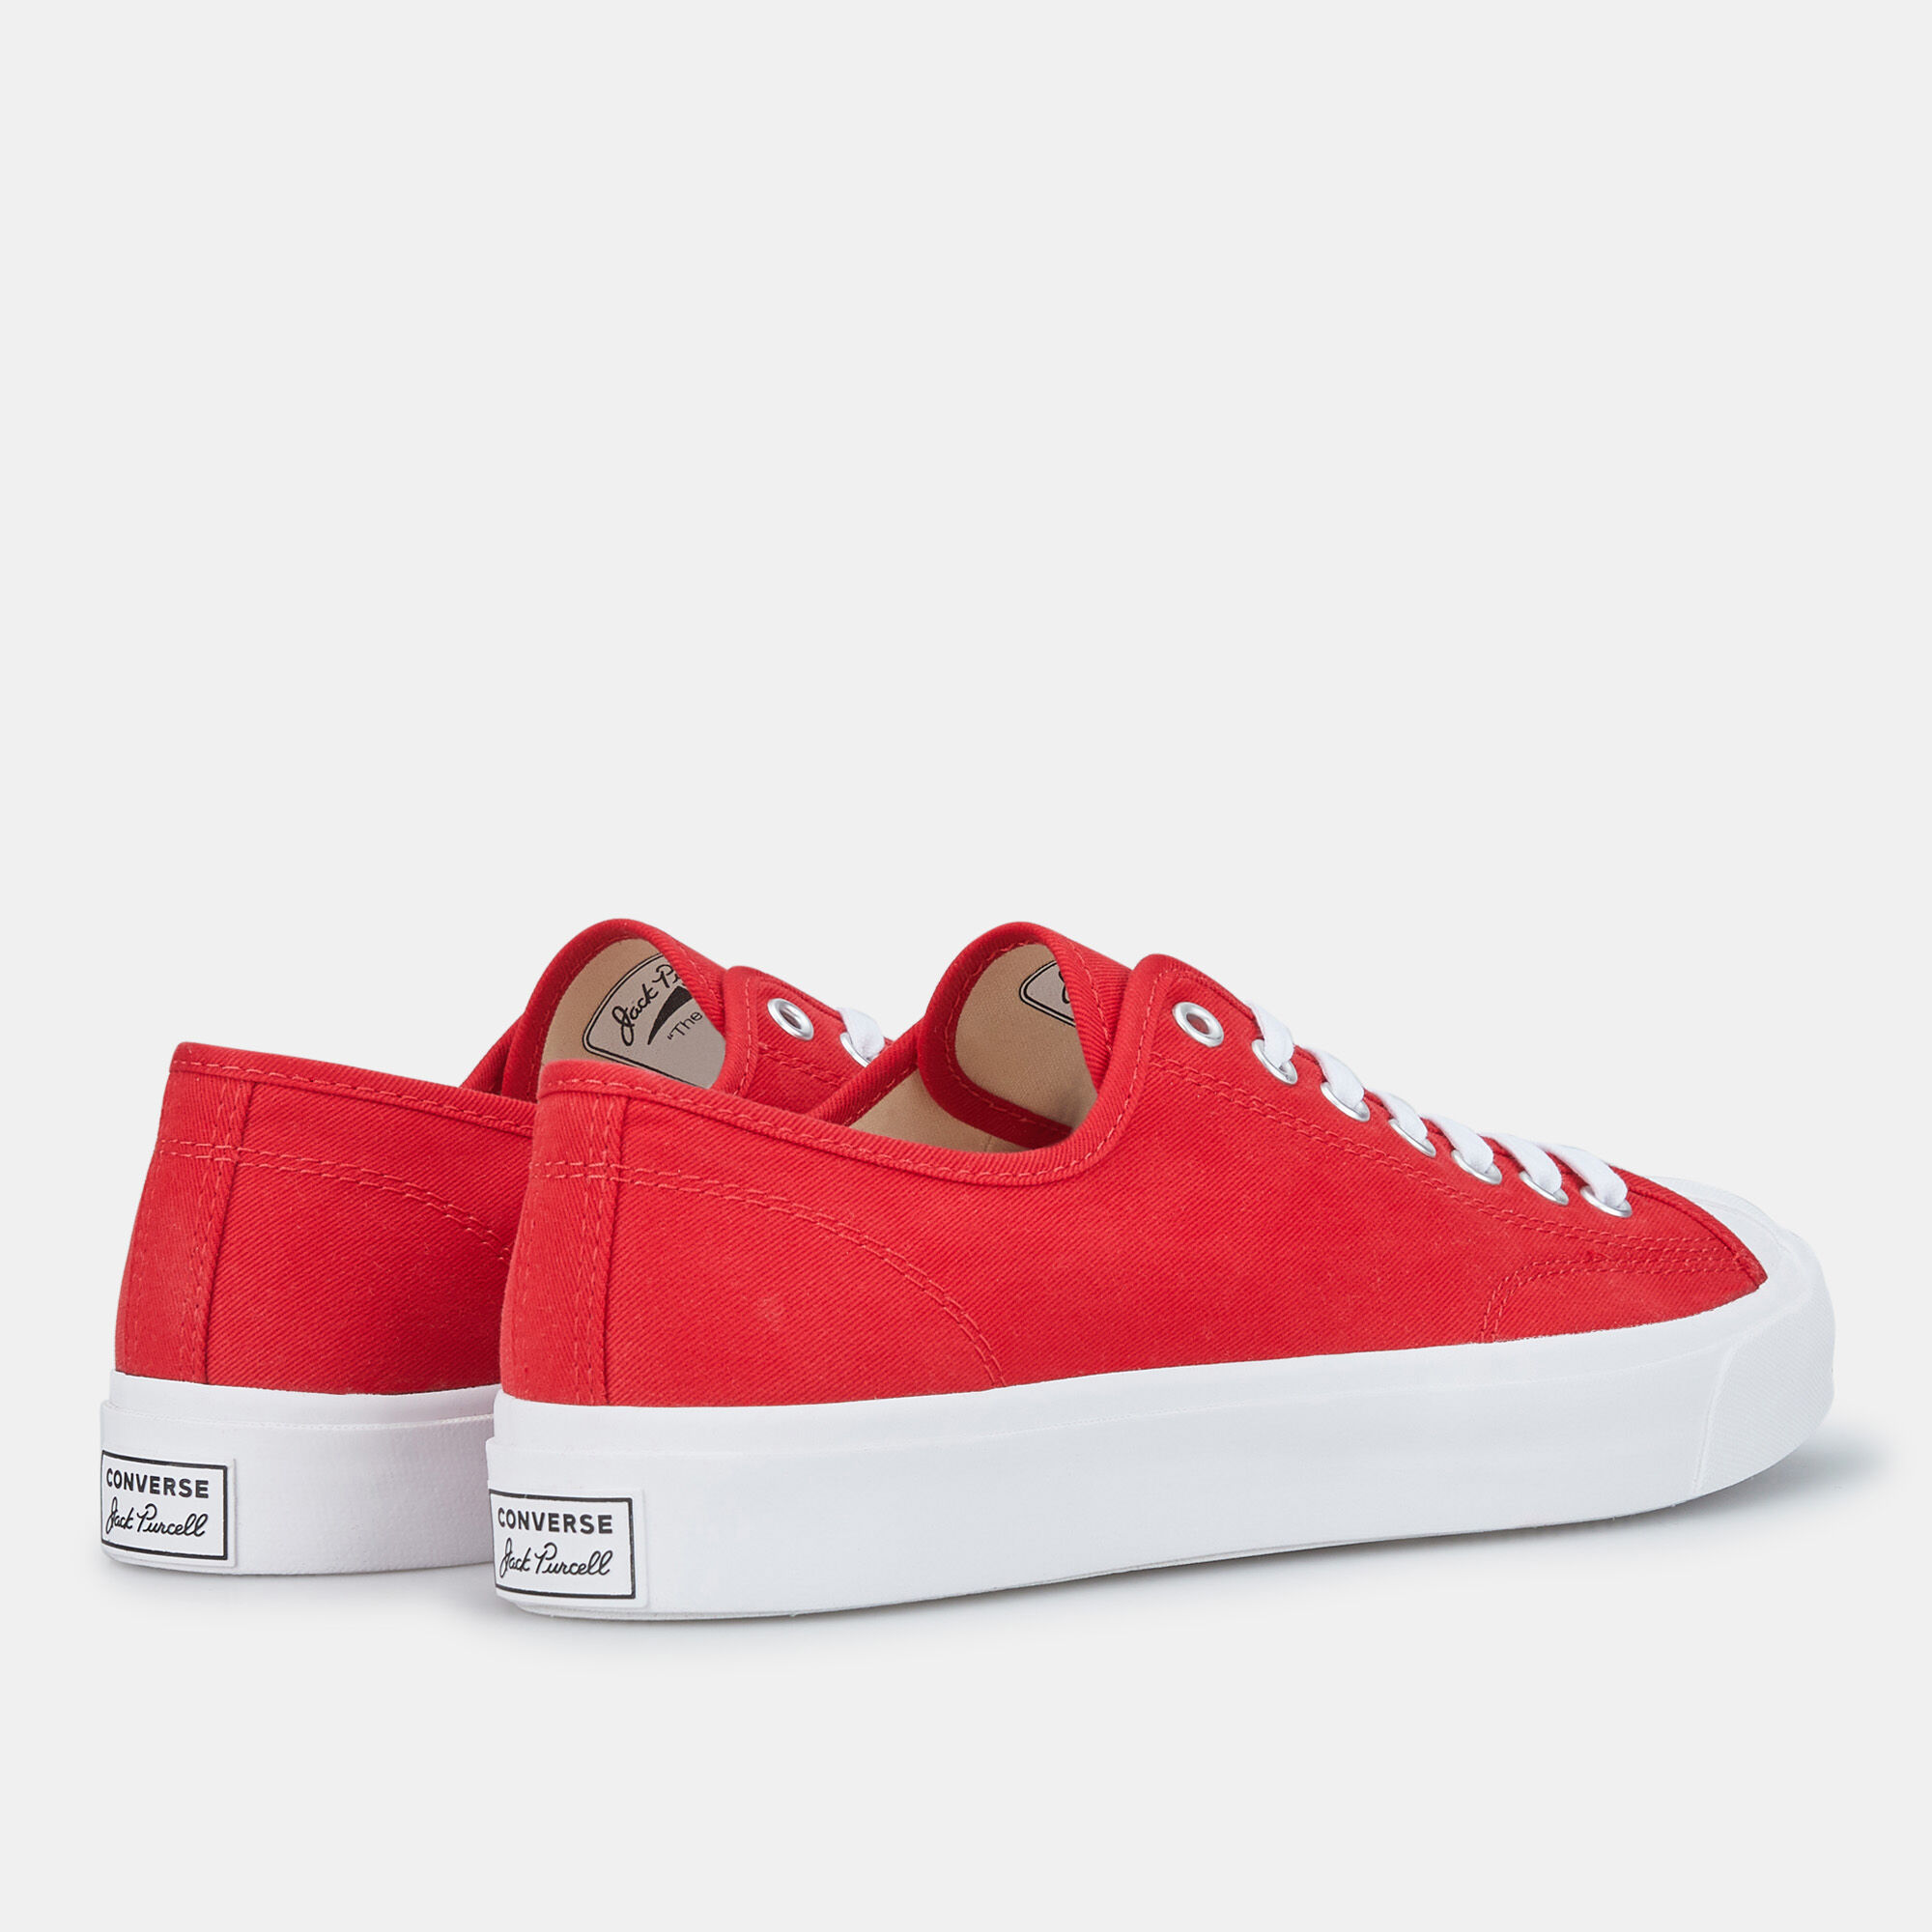 Buy Converse Jack Purcell Twill Ox Shoe 